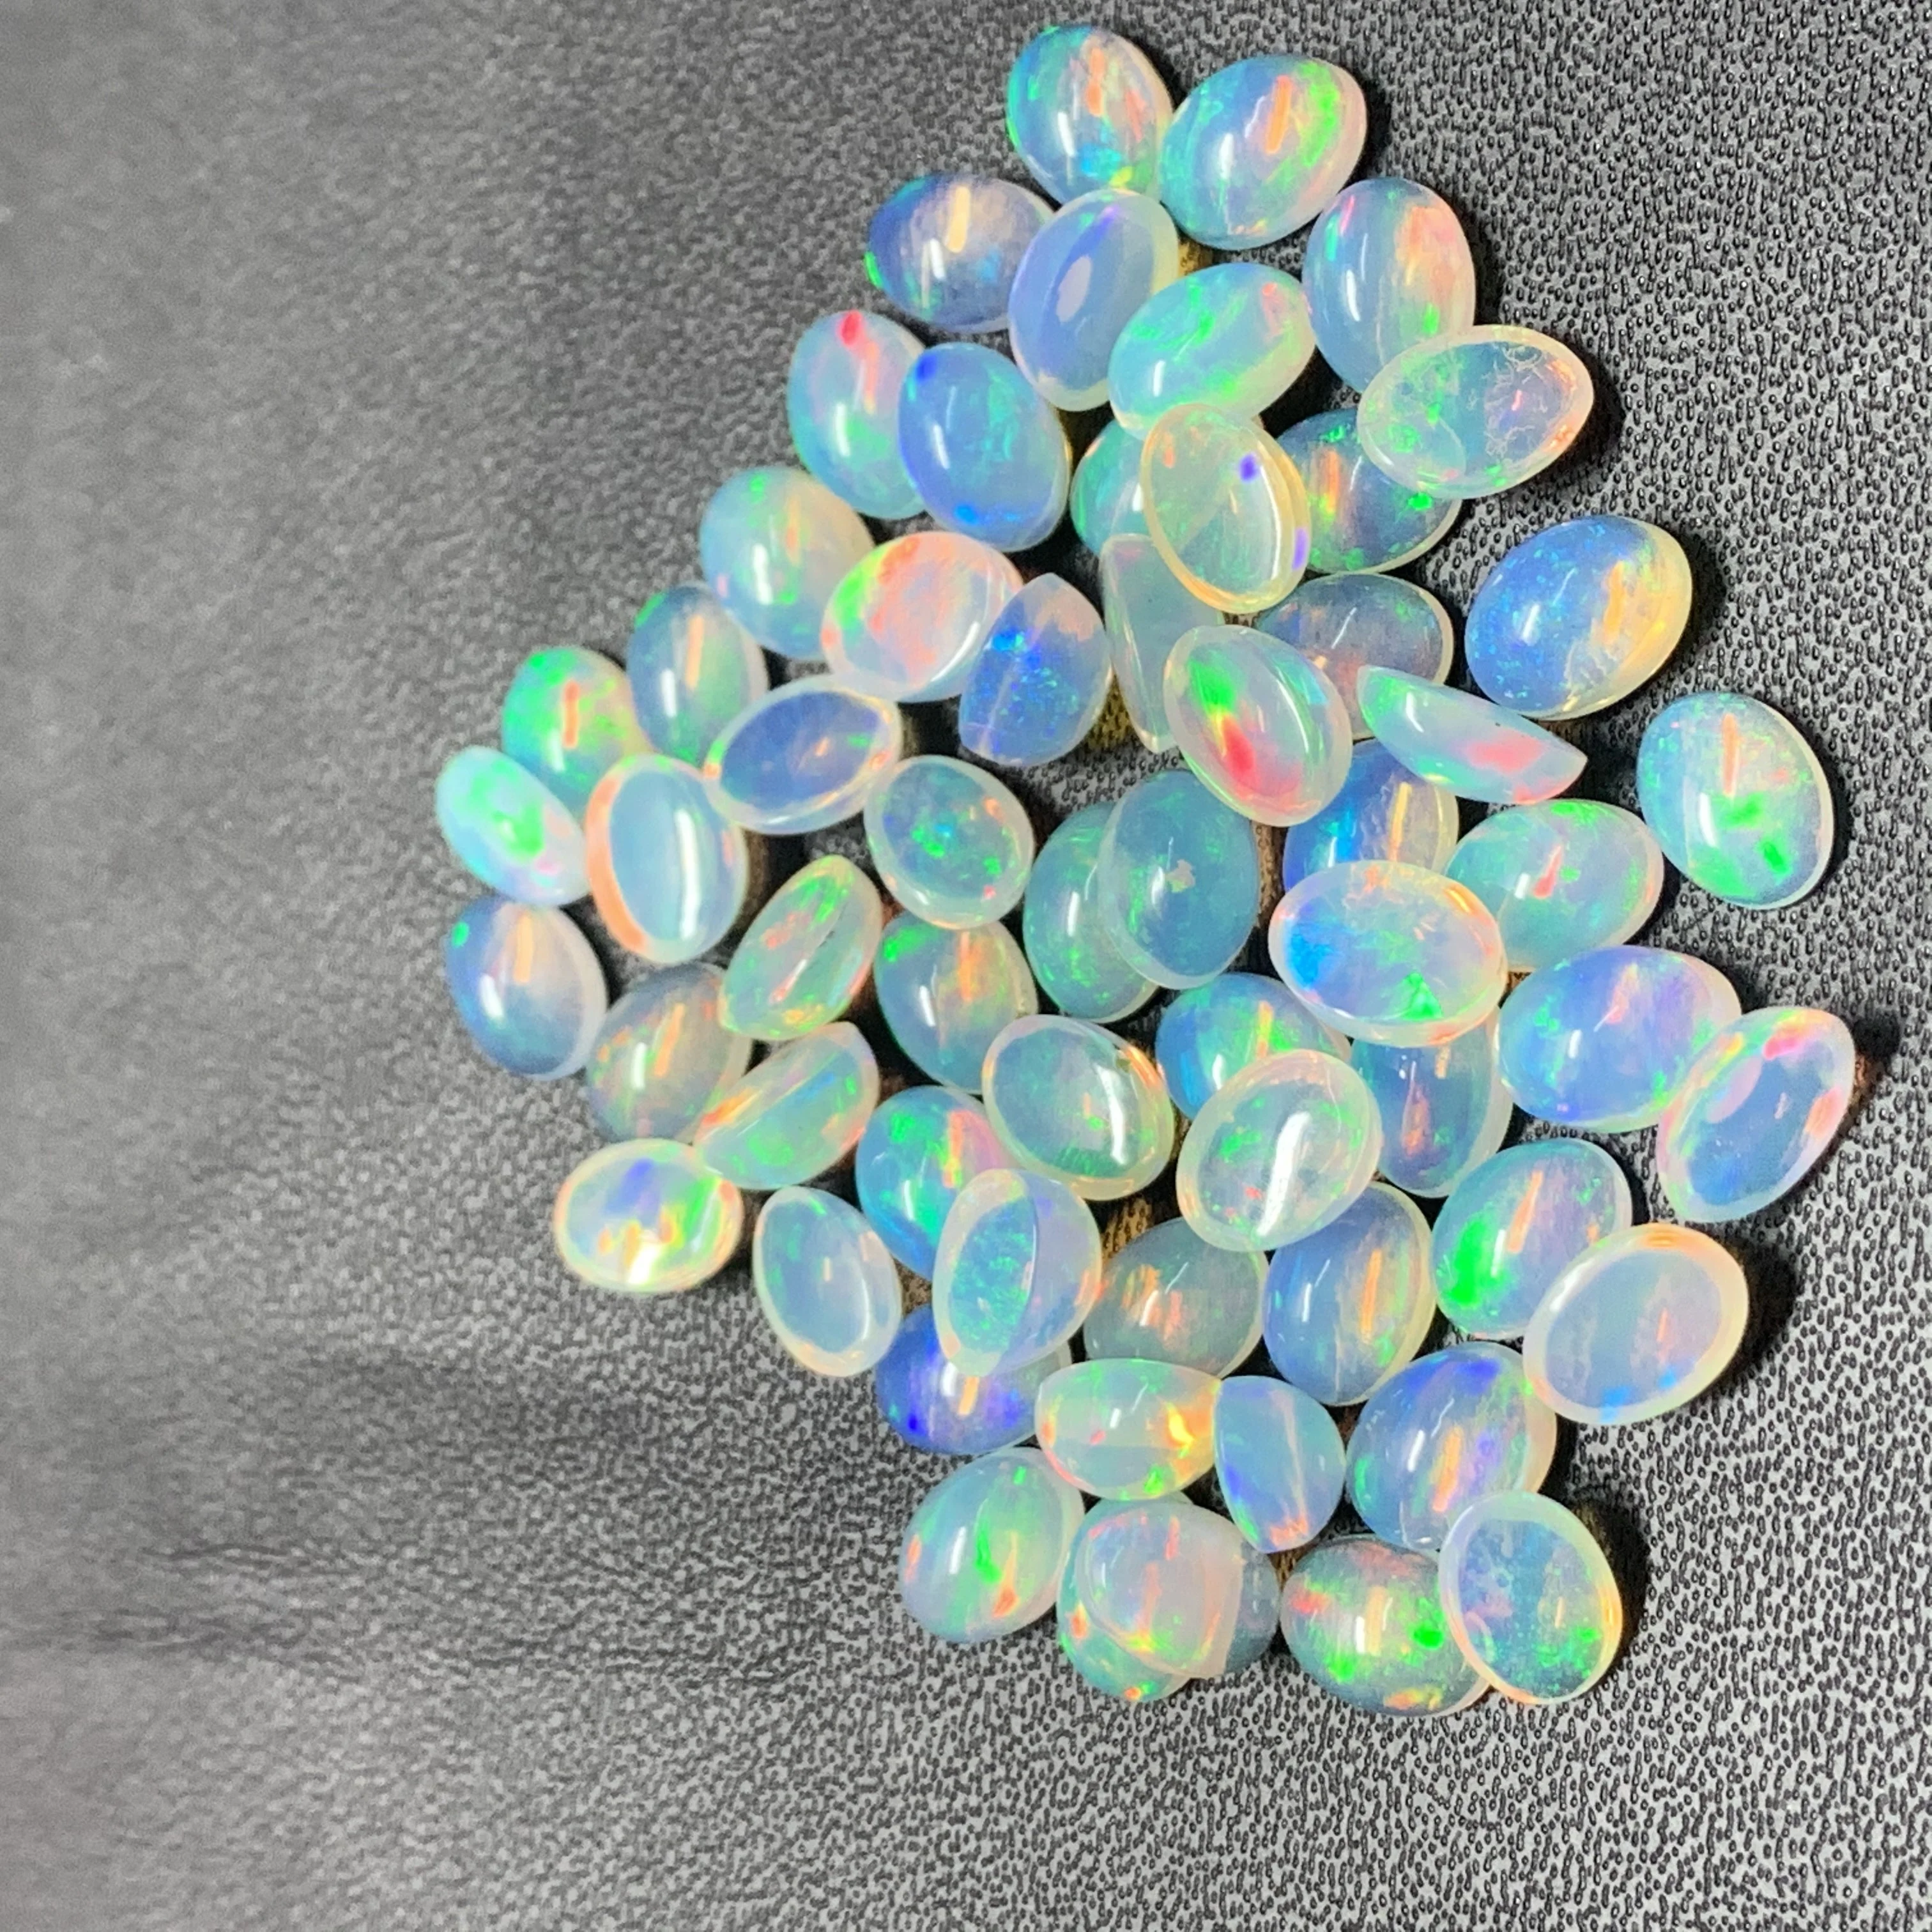 Best Quality Wholesale 3218 Natural Ethiopian Opal 1.45 Ct 5x7 mm Size Flashy Multi Fire Oval Shape Gemstone Smooth Loose Cabochon AAA